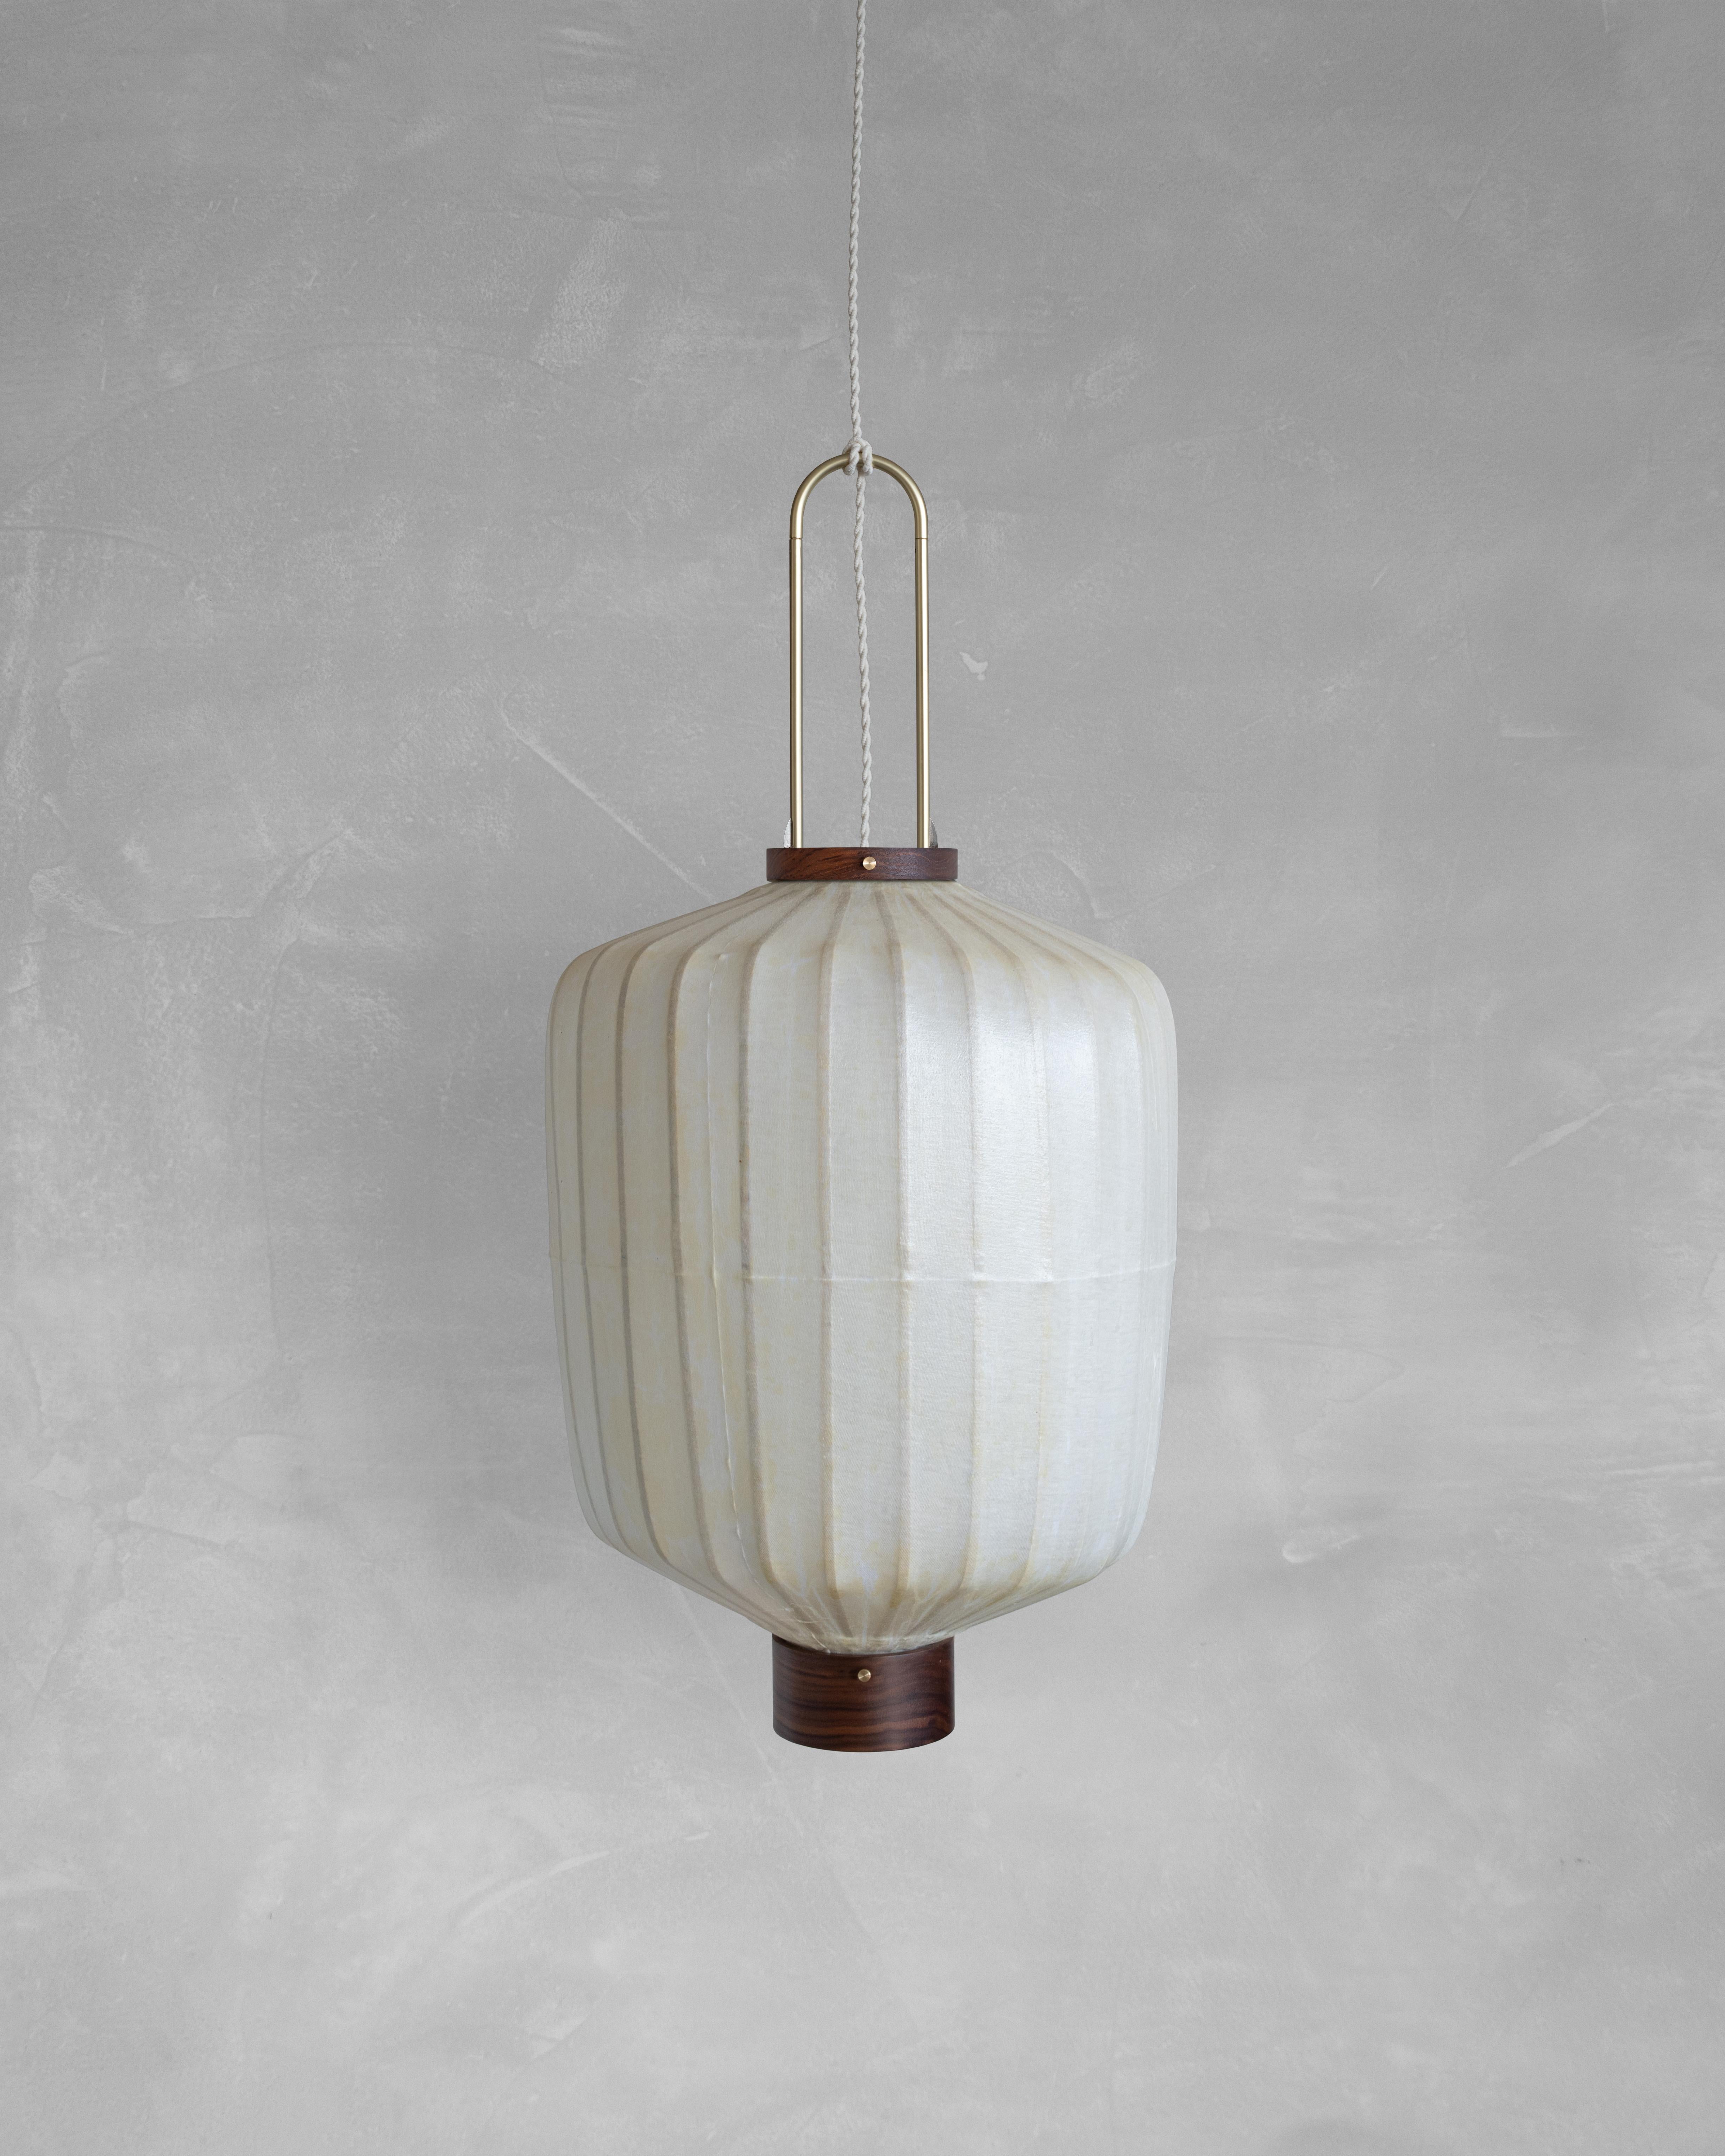 HU02O Pendant Lamp XL by Taiwan Lantern
Dimensions: D 46 x W 46 x H 68 cm.
Material: Walnut & bamboo frame, Hand-colored fabrics, Metal pipes, Leather lace, Handmade porcelain ceiling cap.


This brown color is inspired by Wu Xing 五行. Brown presents